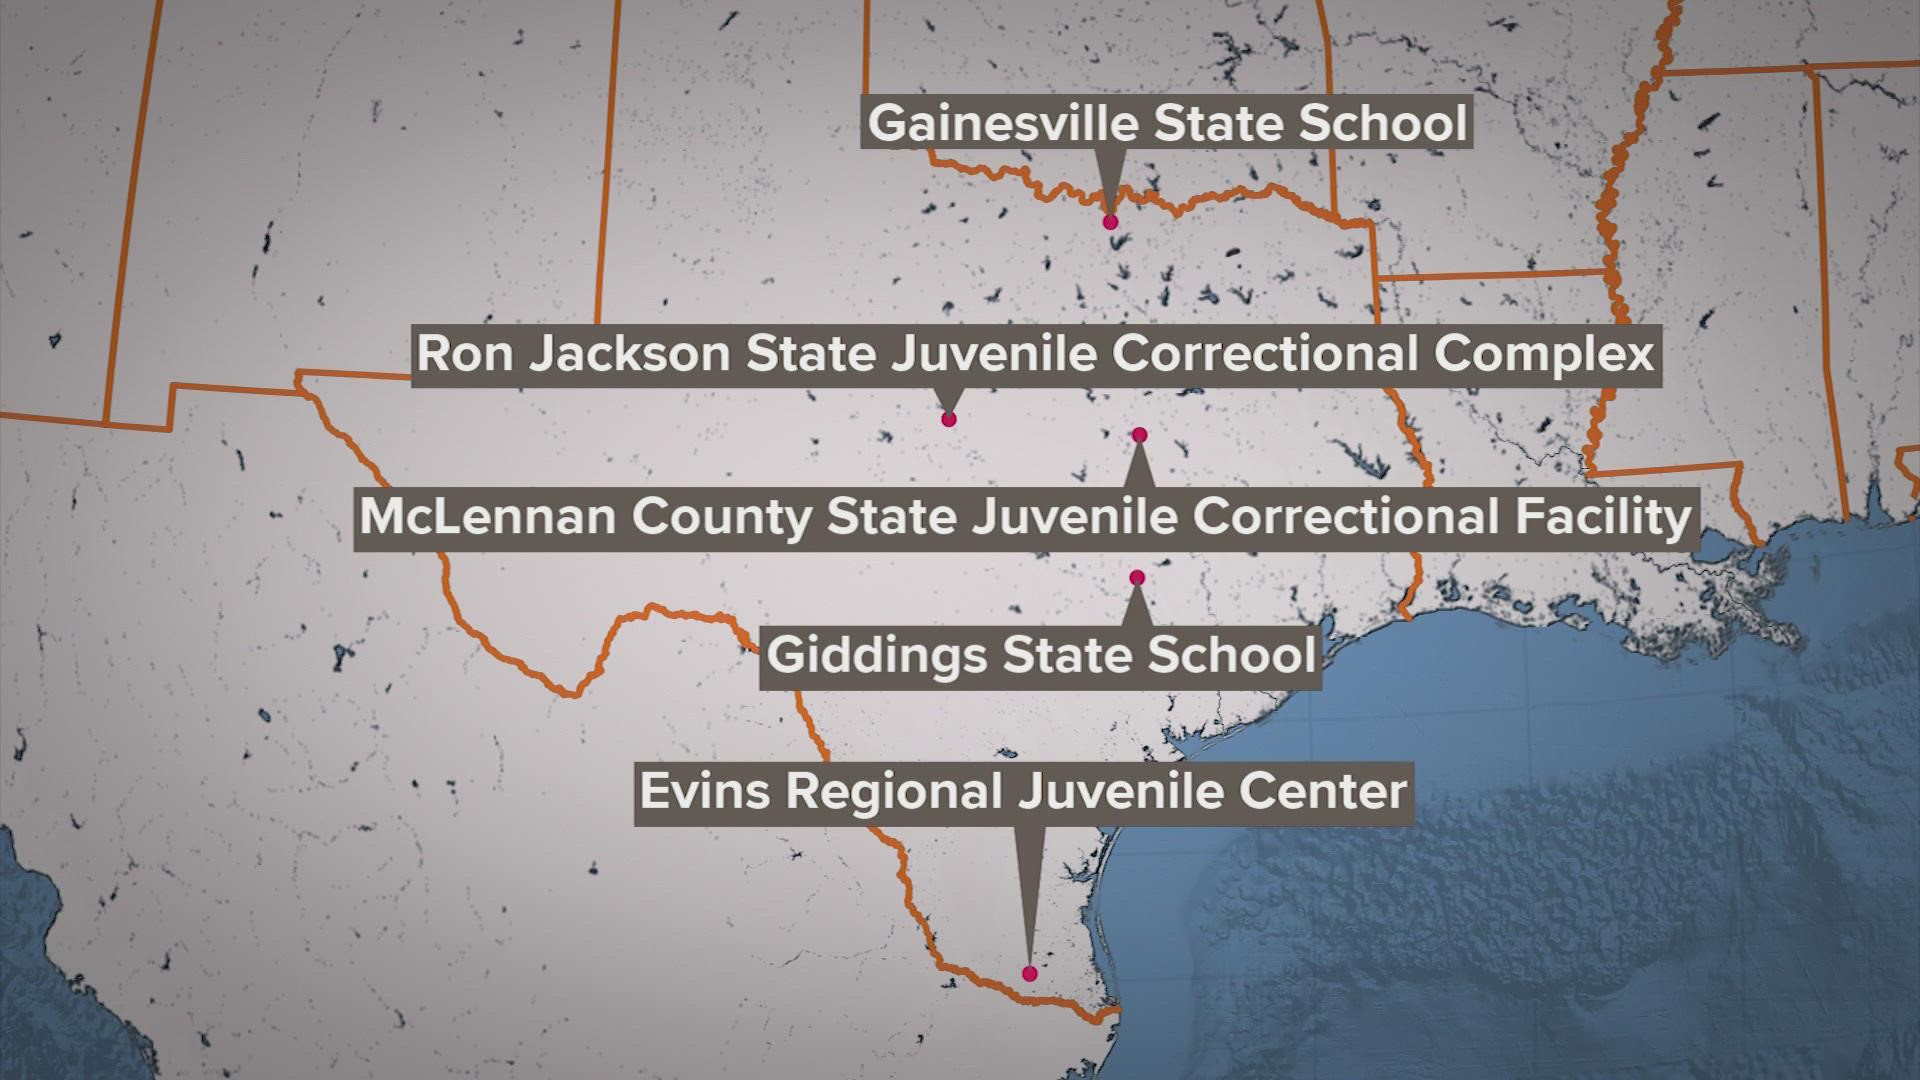 The Justice Department has launched a civil rights investigation into the conditions at five juvenile facilities in Texas.